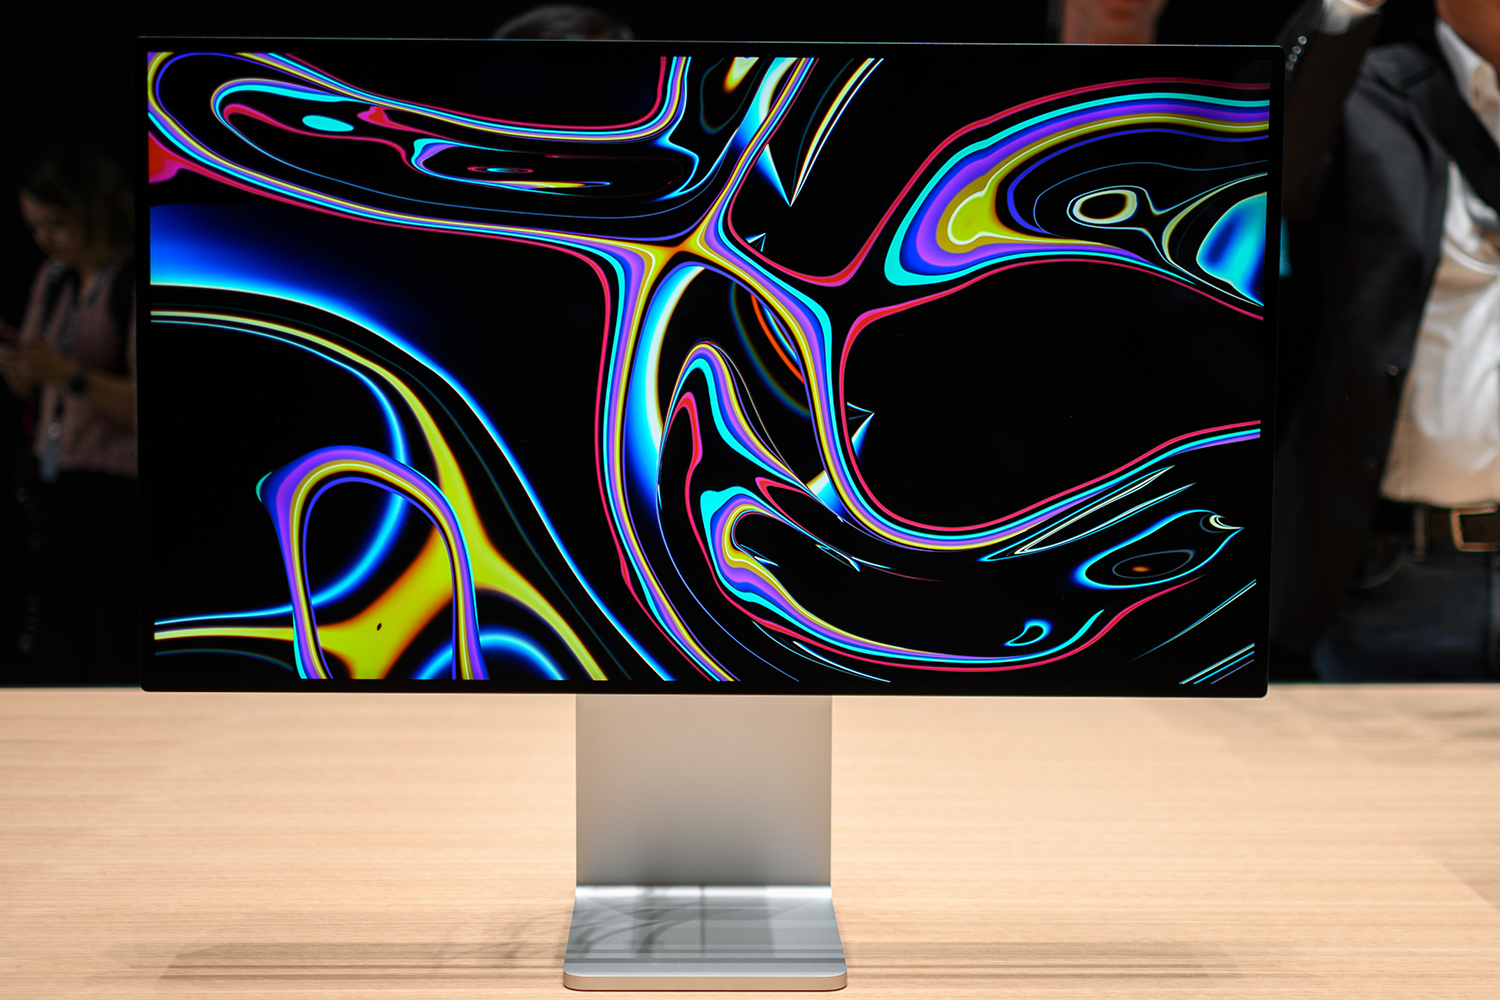 Apple Pro Display XDR WWDC 2019 Hands On